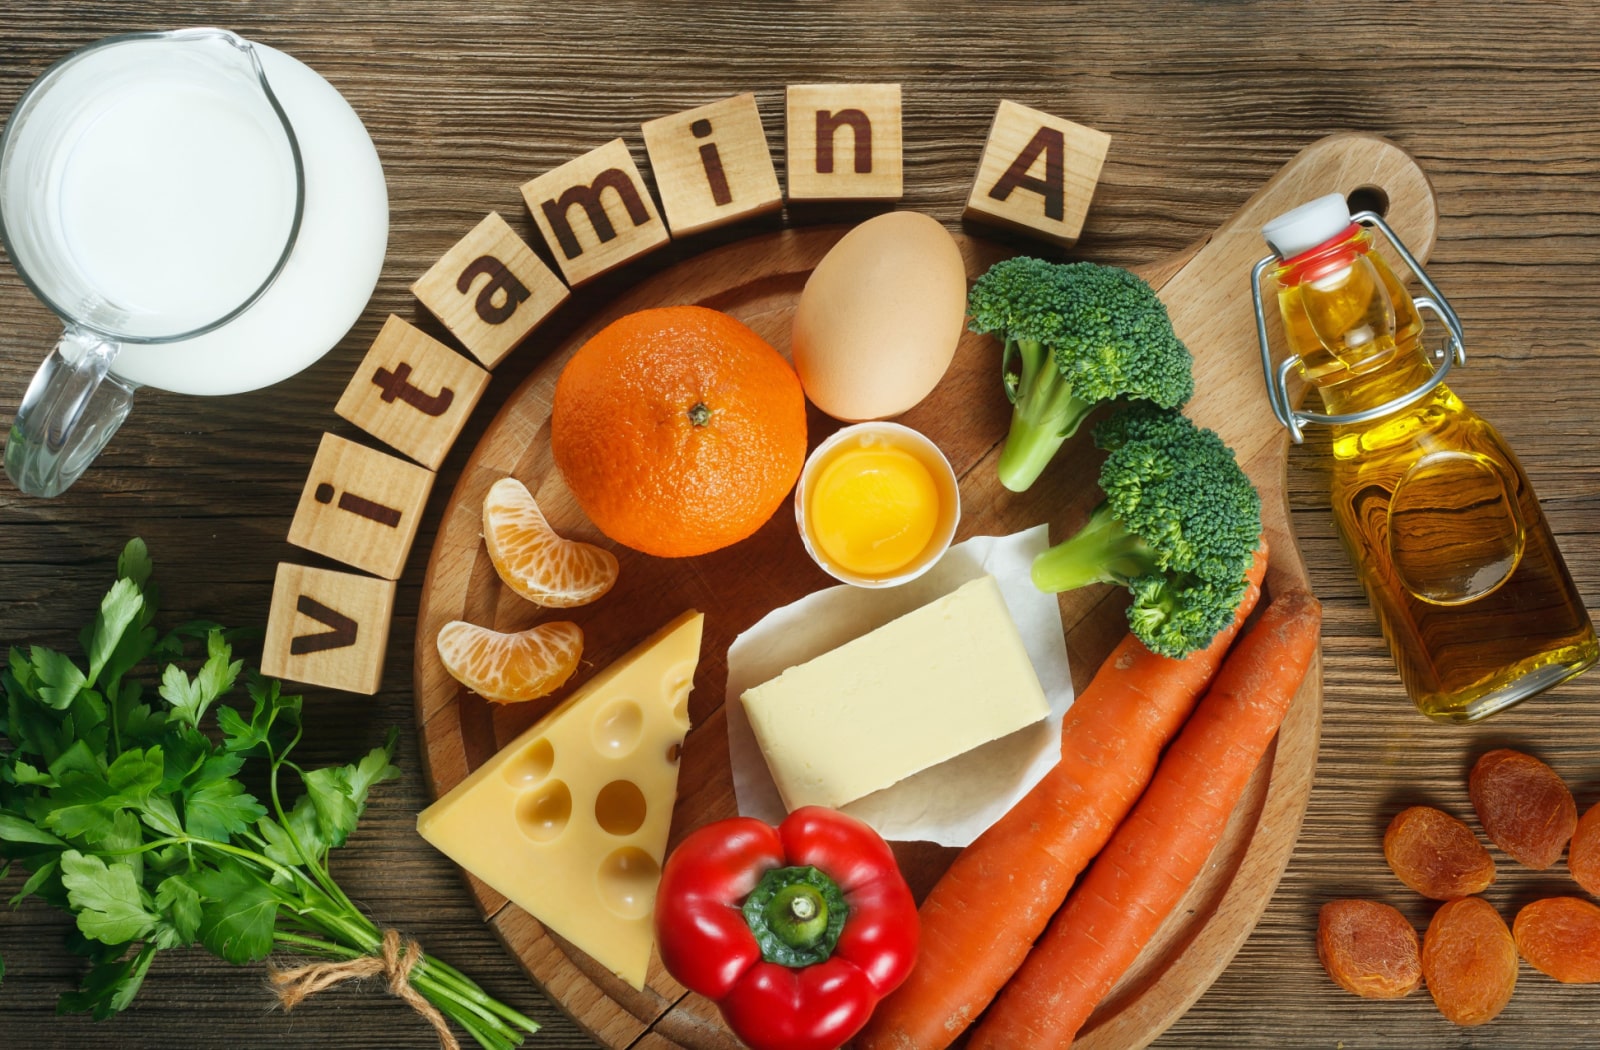 A variety of foods that are a good source of Vitamin A, Like milk, cheese, carrots, bell pepper, carrots, broccoli, parsley, and oranges.